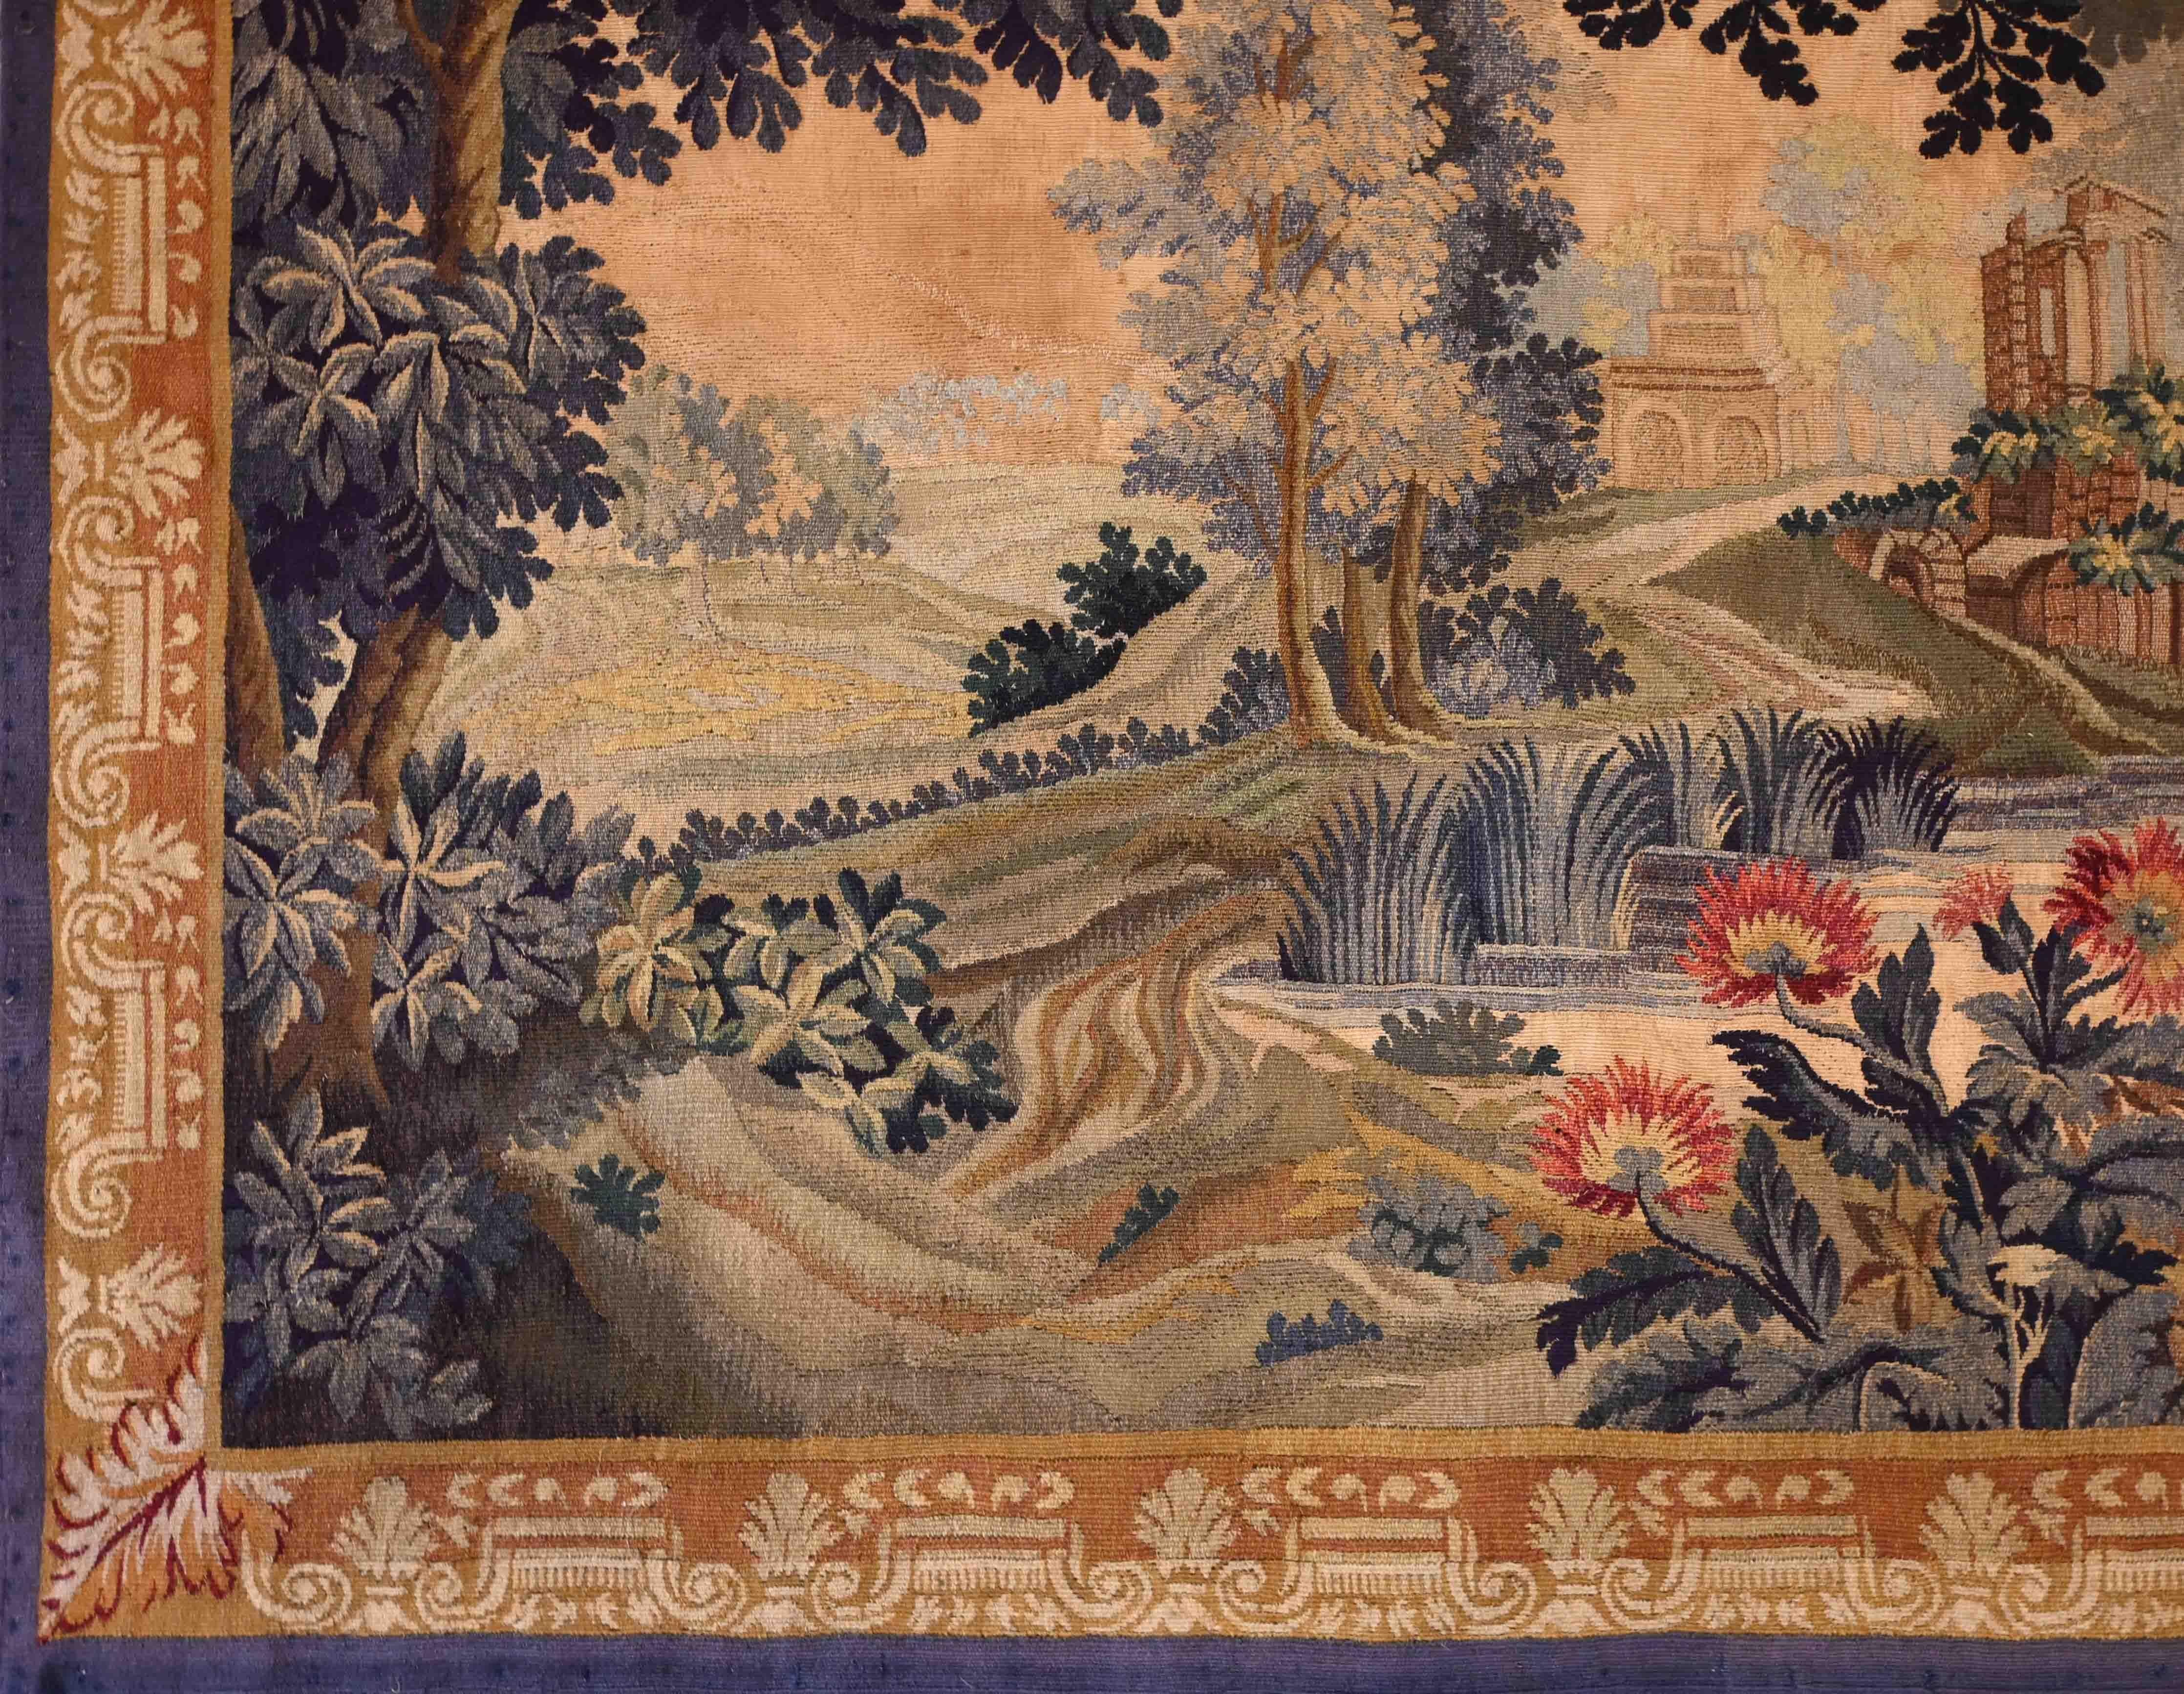 Hand-Woven Greenery French Aubusson Tapestry 19th century - L1m76xH1m48 - No. 1384 For Sale